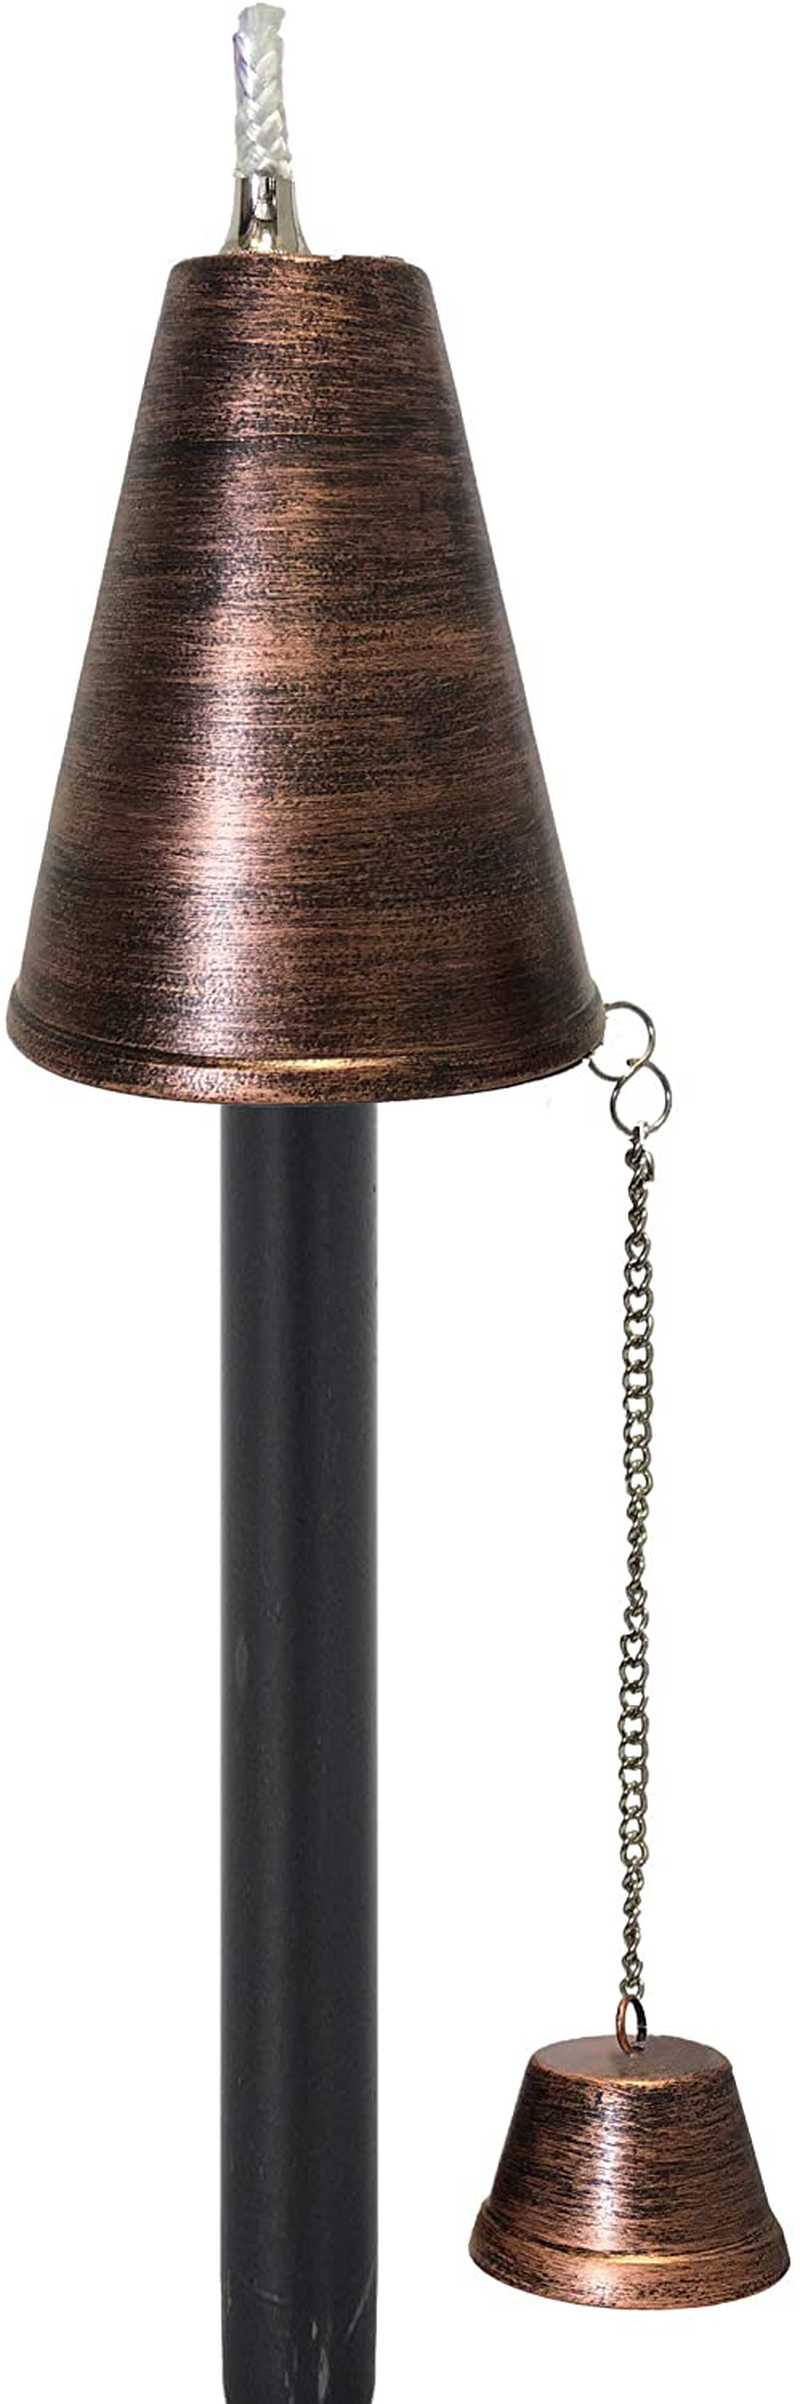 Hawaiian Cone Tiki Style Torch - Outdoor Oil Lamp Includes 3-piece 54” Black Pole for Easy Set Up - 60oz Bowl with Matching Snuffer and Fiberglass Wick Burns for a long time! 4 Pack (Hammered Patina) Home & Garden > Lighting Accessories > Oil Lamp Fuel Legends Direct Brushed Bronze 1 Pack 